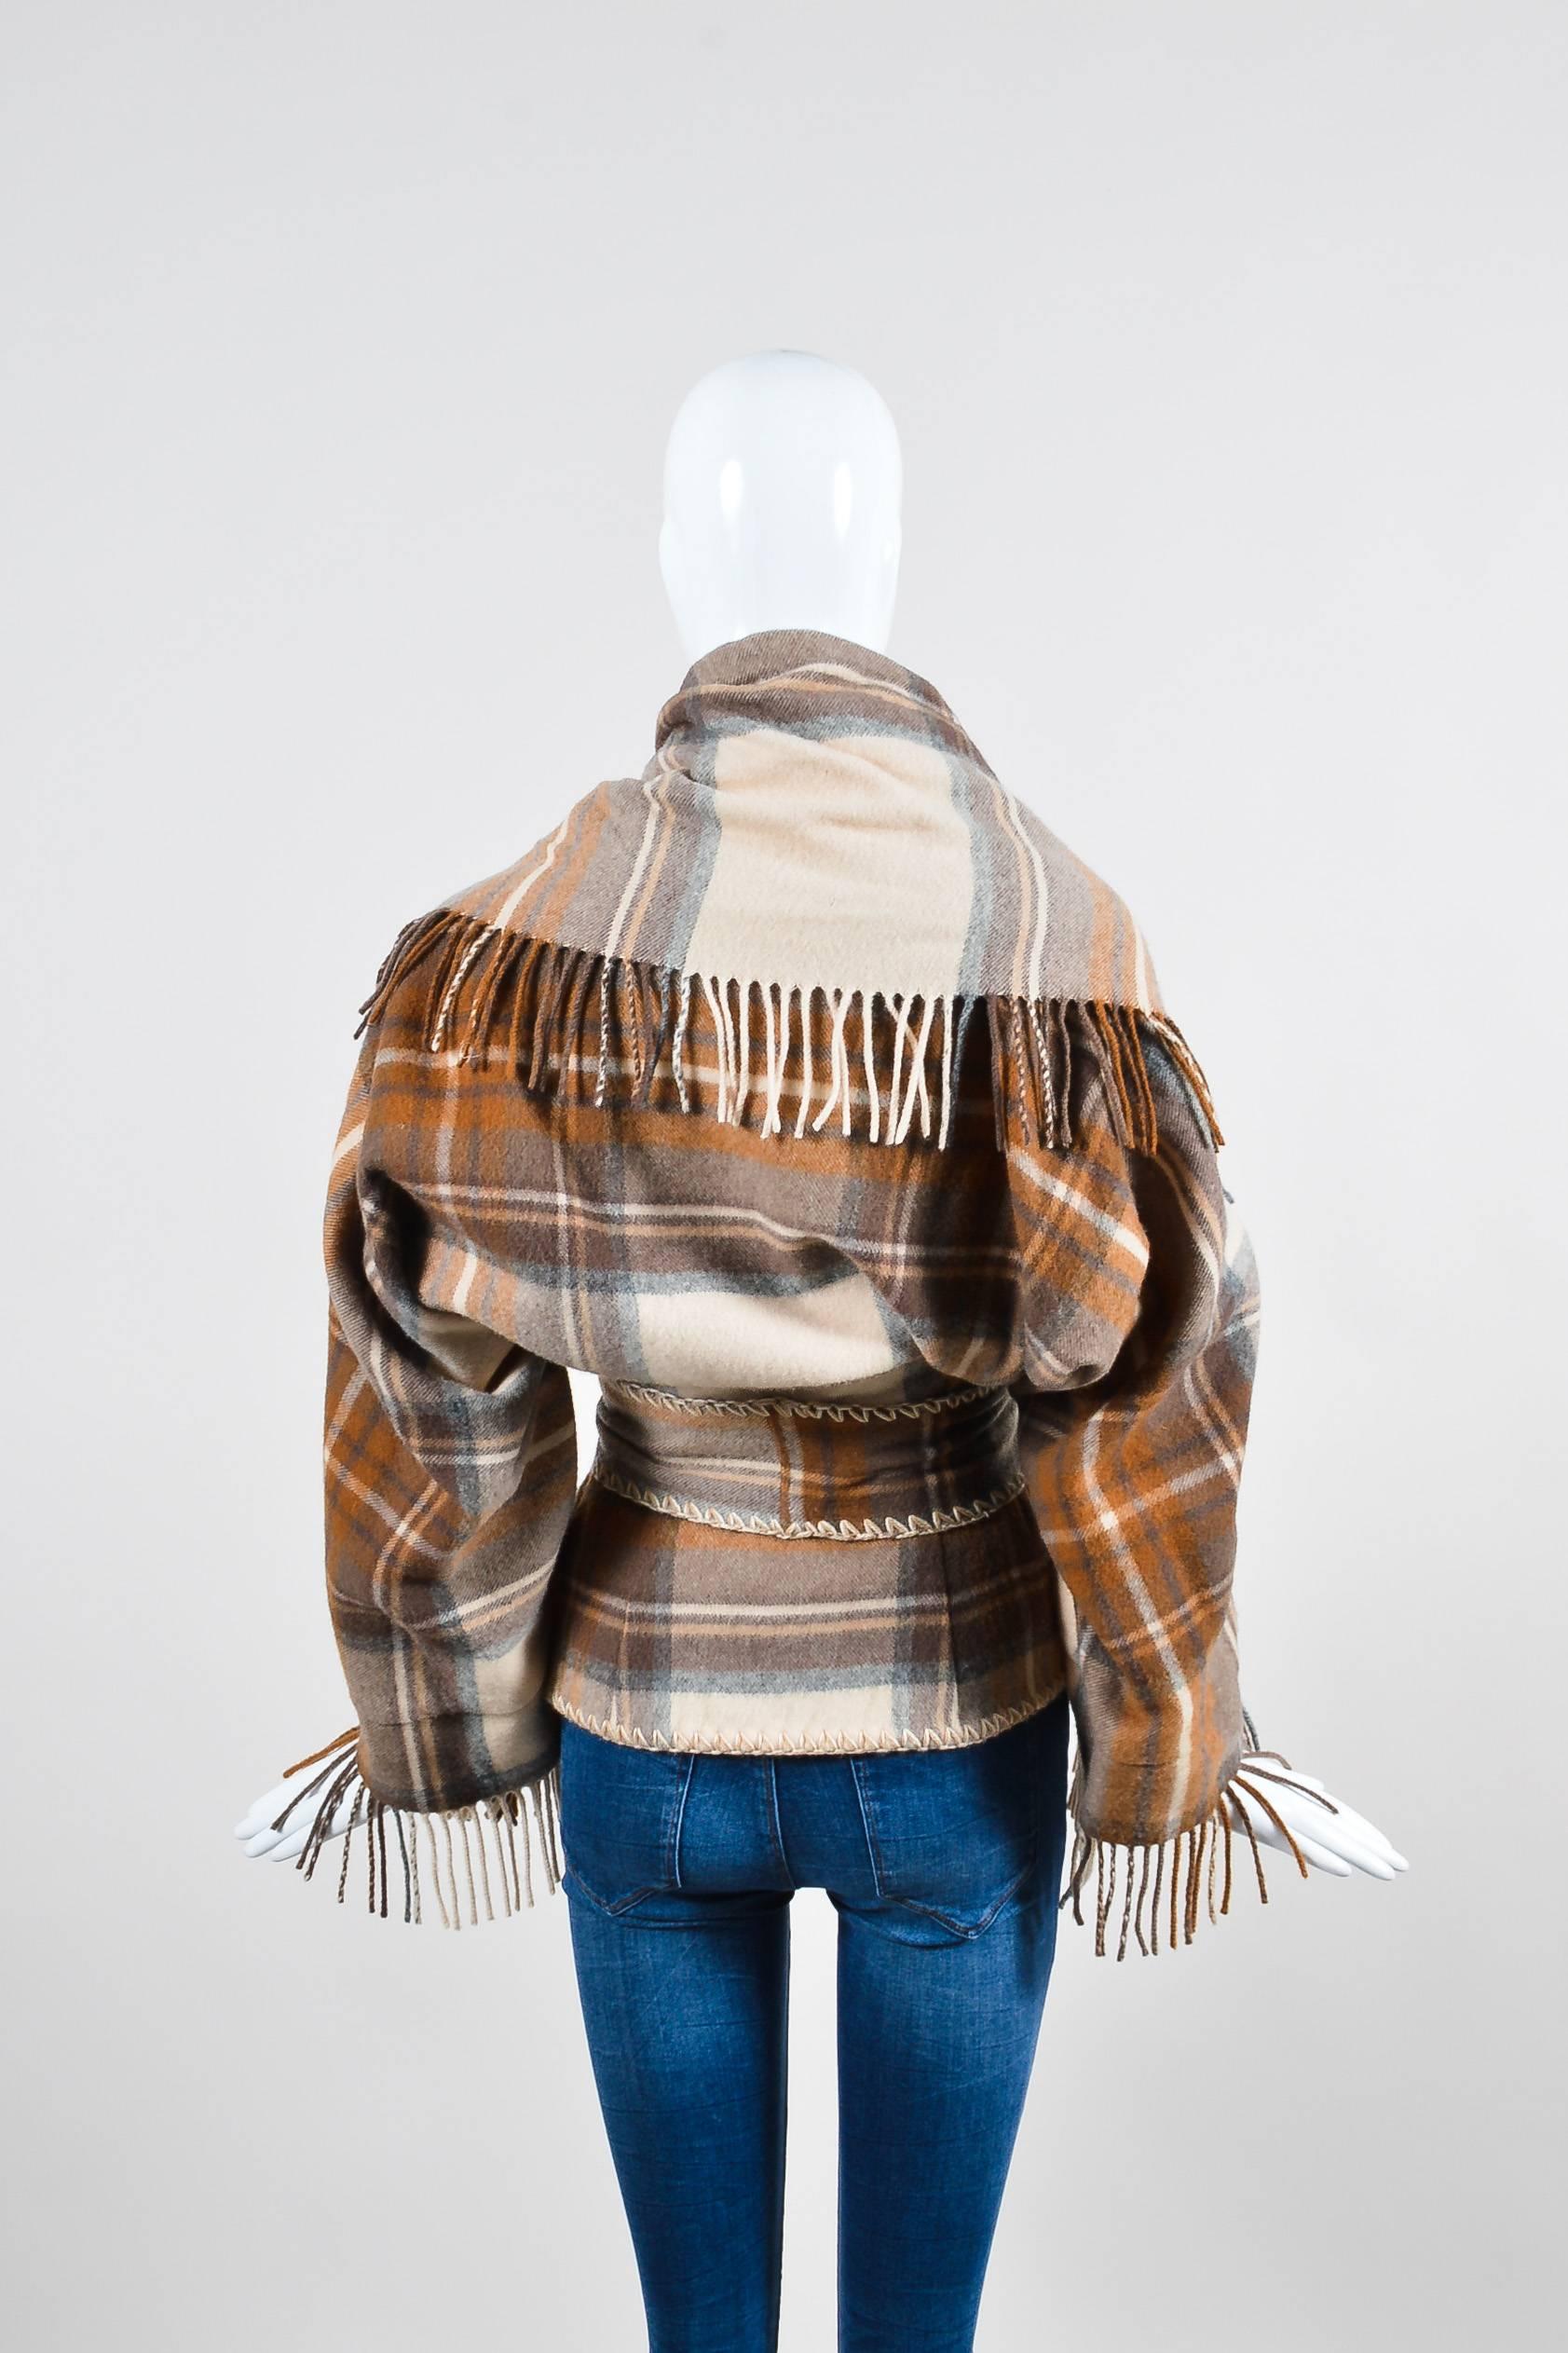 Go southwest chic in this plaid fringed jacket from Alexander McQueen. Brown, tan, and cream colorway in an oversized plaid pattern. Top stitch detailing around the body and belt. Shawl design features a scarf-like neckline that can be pulled up as